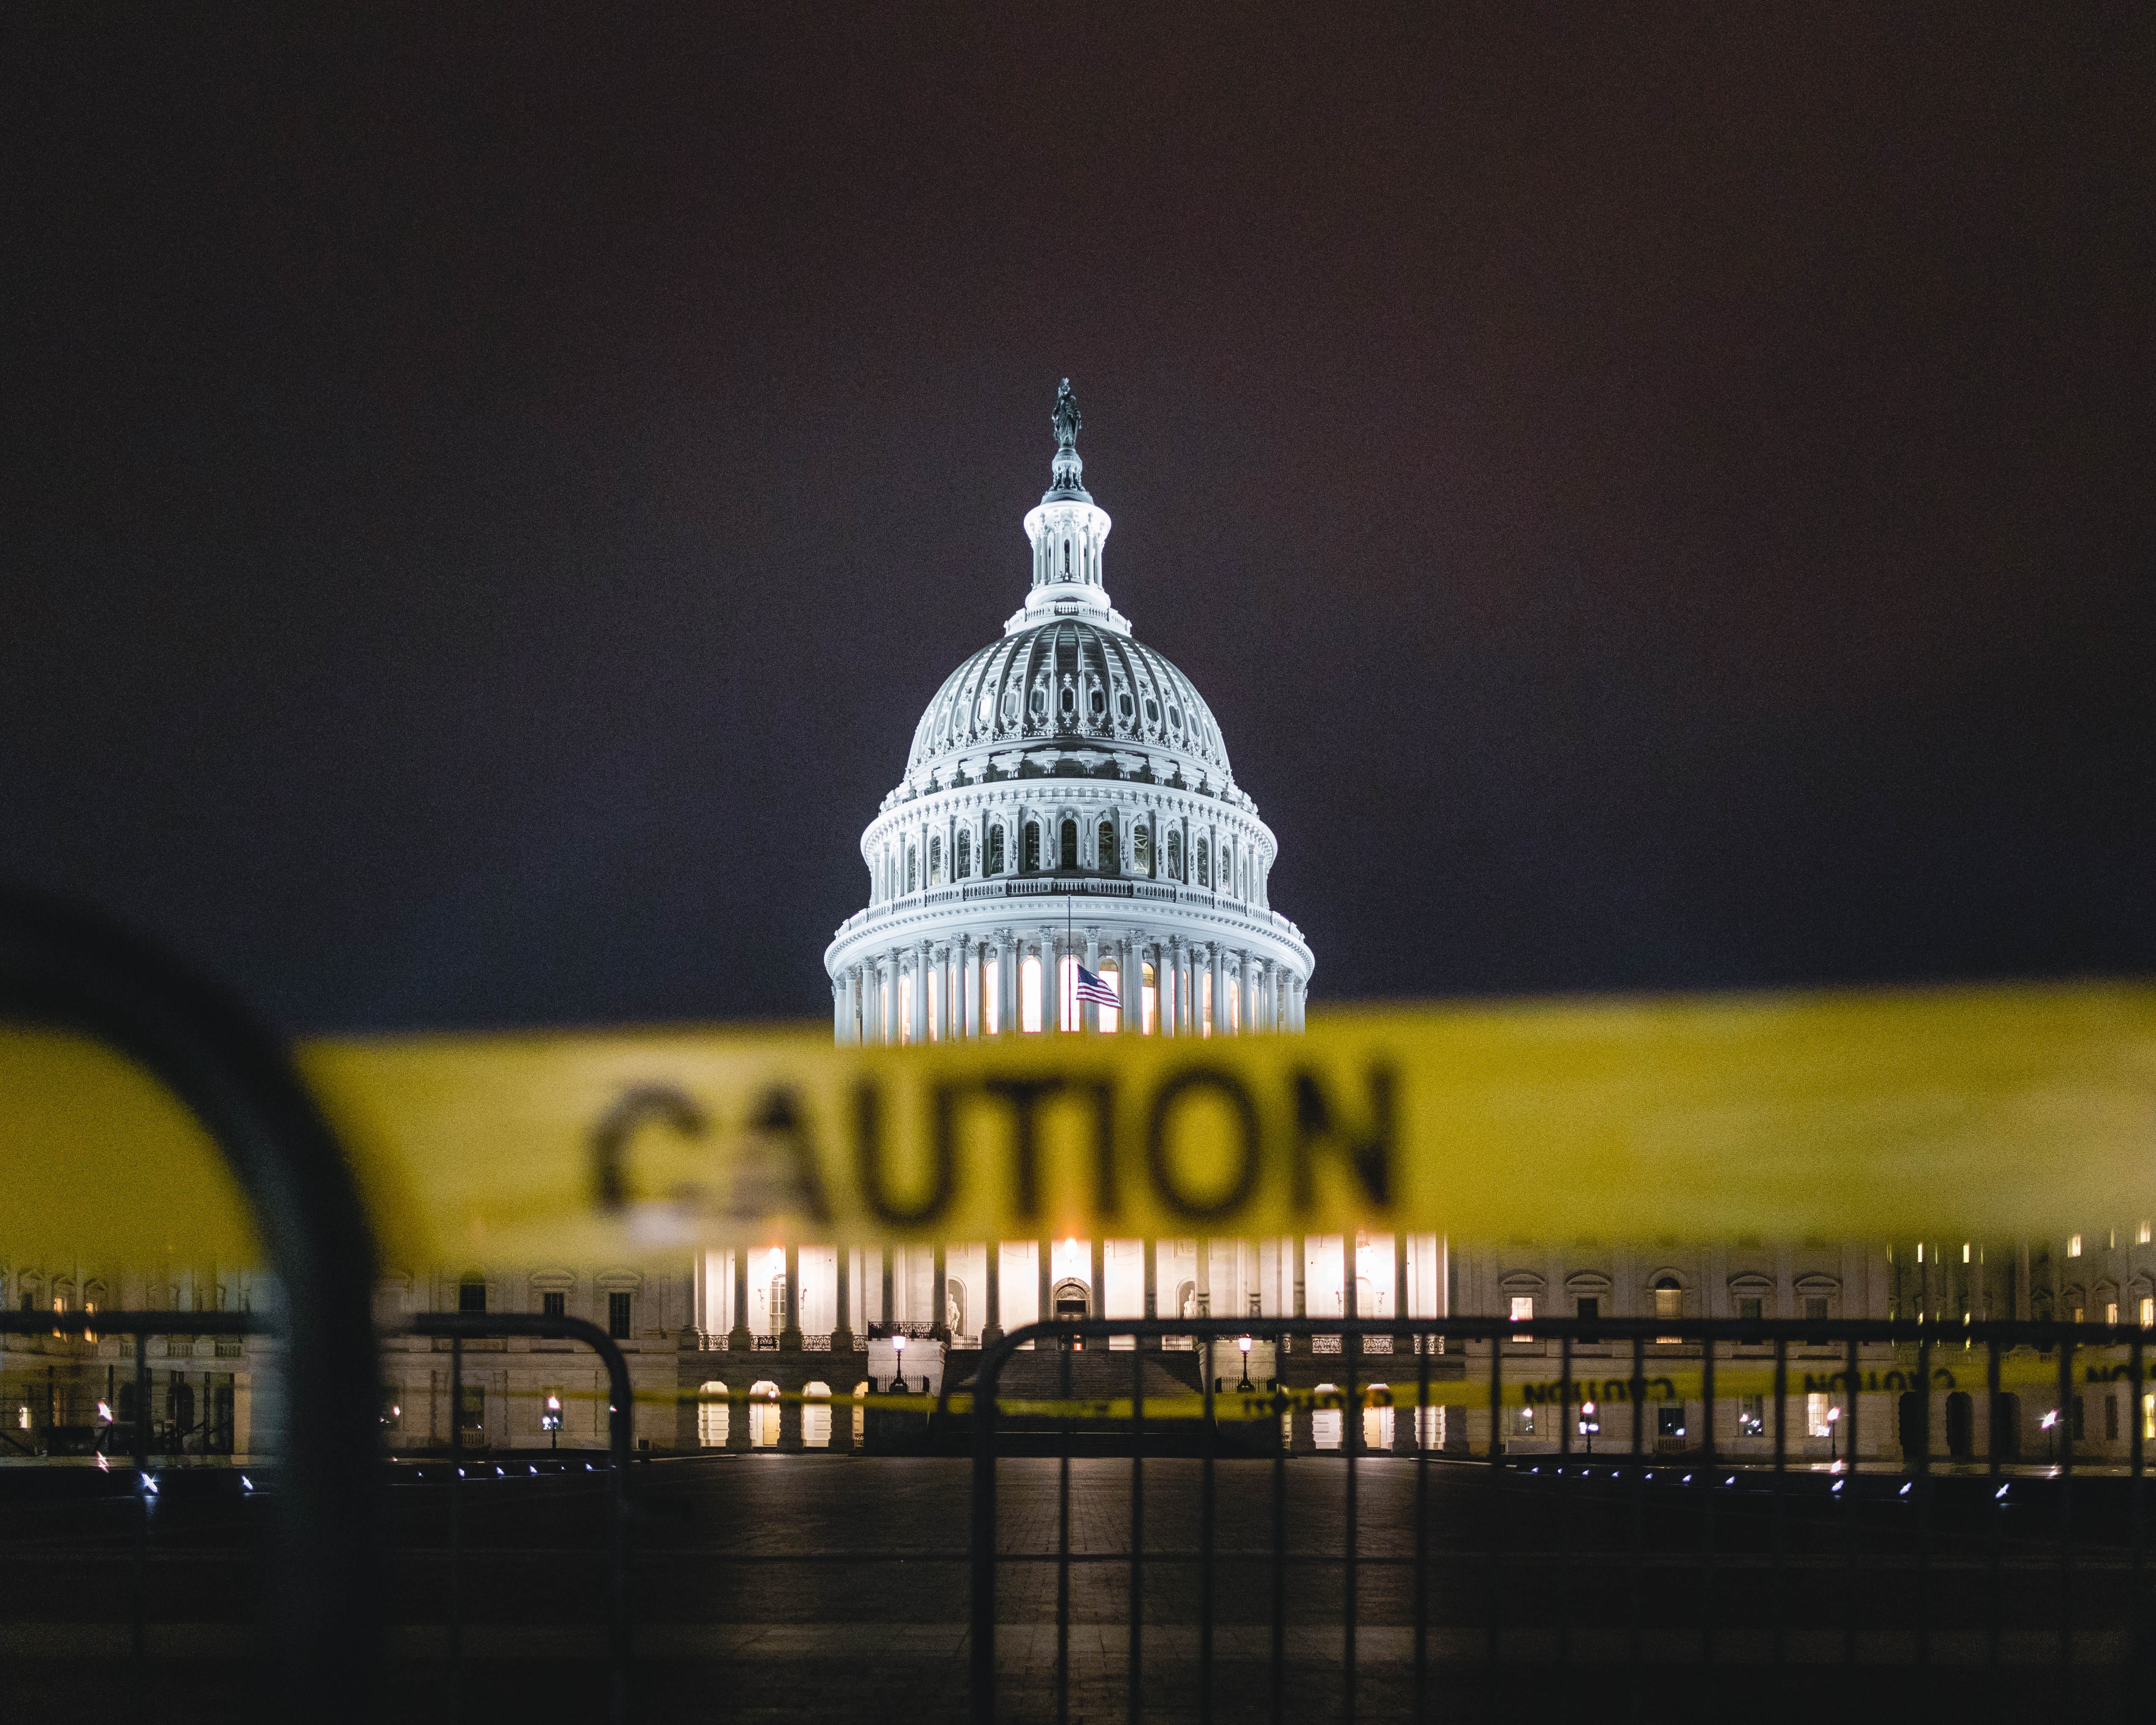 A caution tape perimeter surrounding the US Capitol at night time